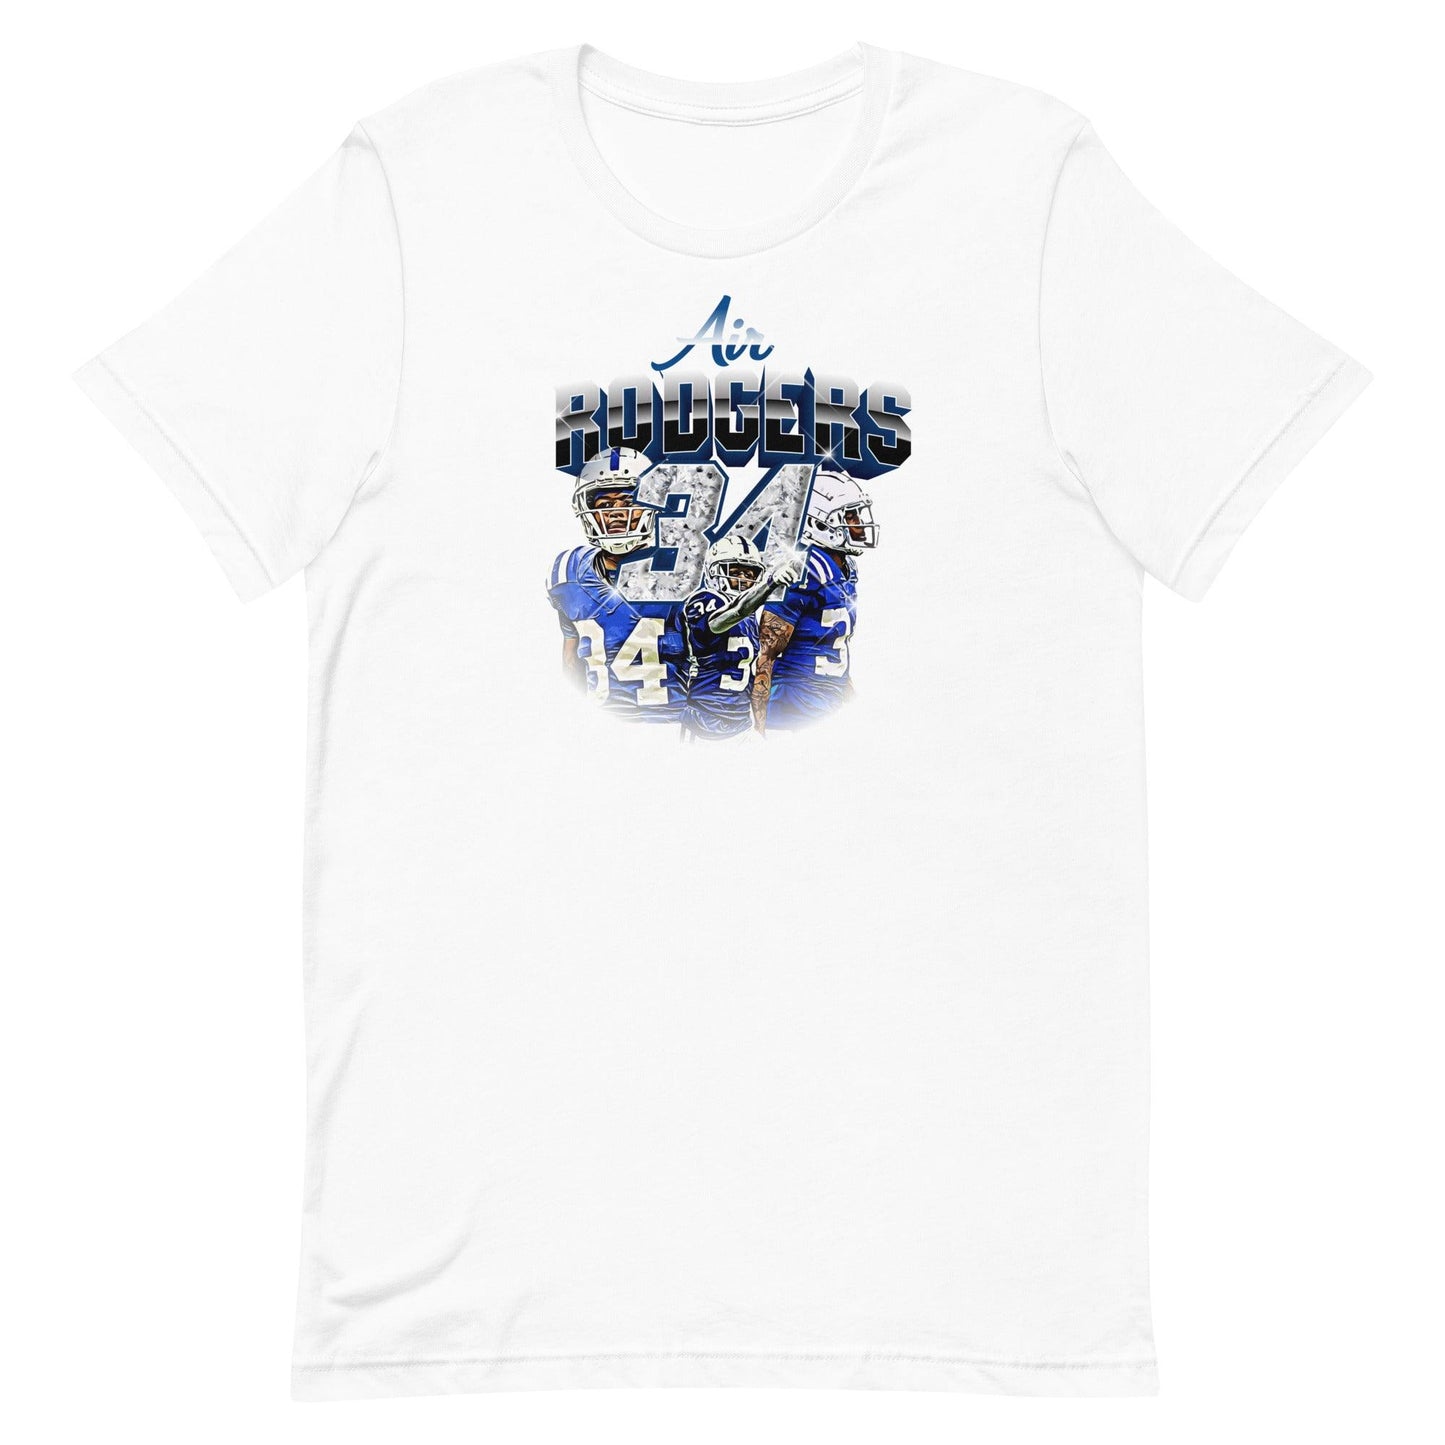 Isaiah Rodgers "Limited Edition" t-shirt - Fan Arch